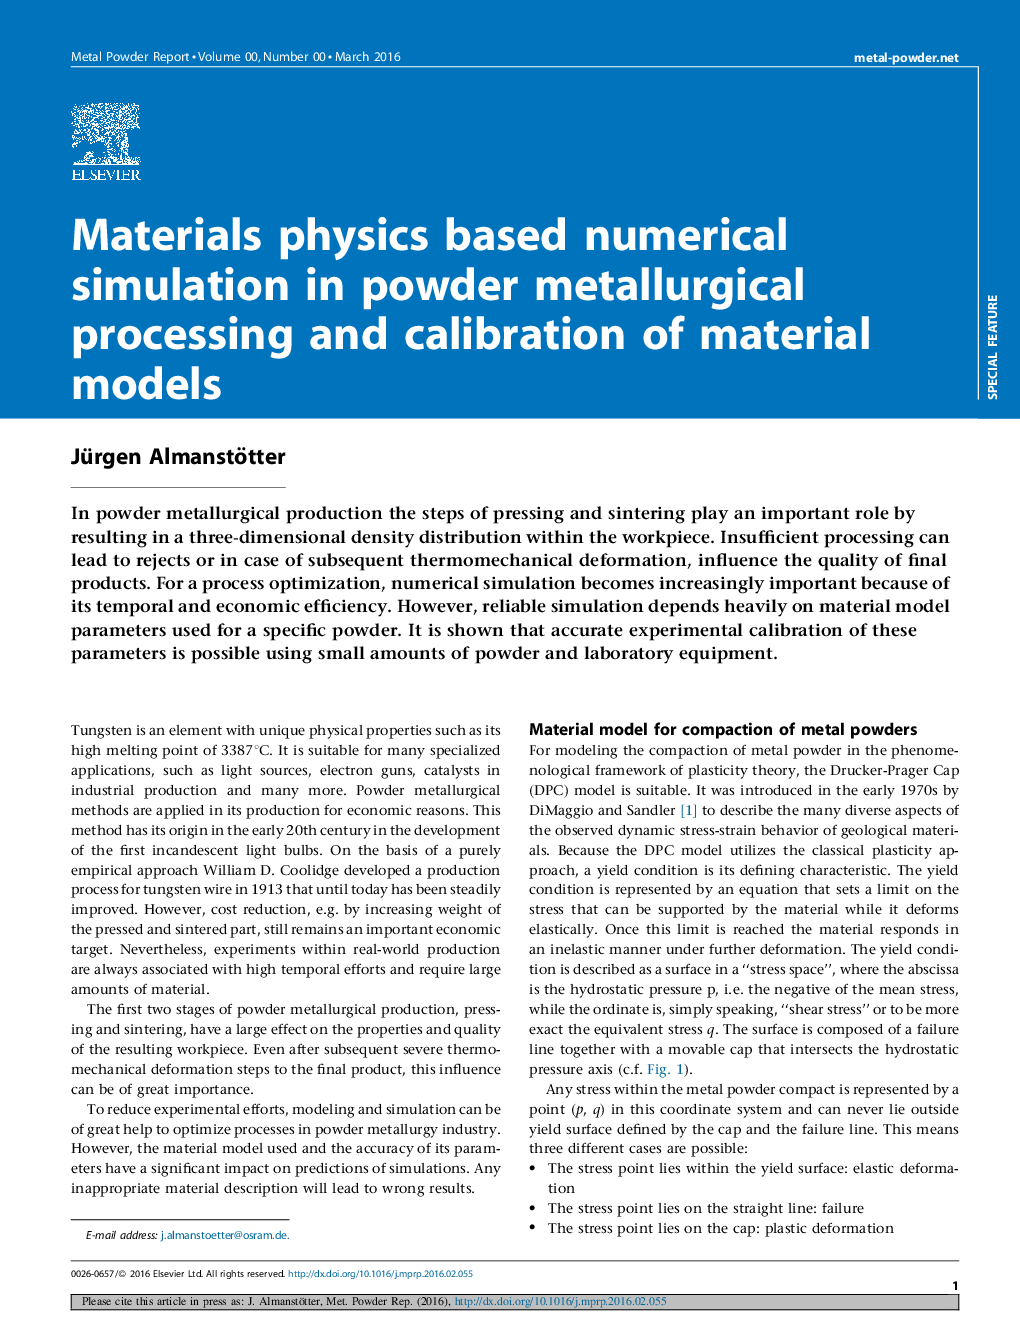 Materials physics based numerical simulation in powder metallurgical processing and calibration of material models